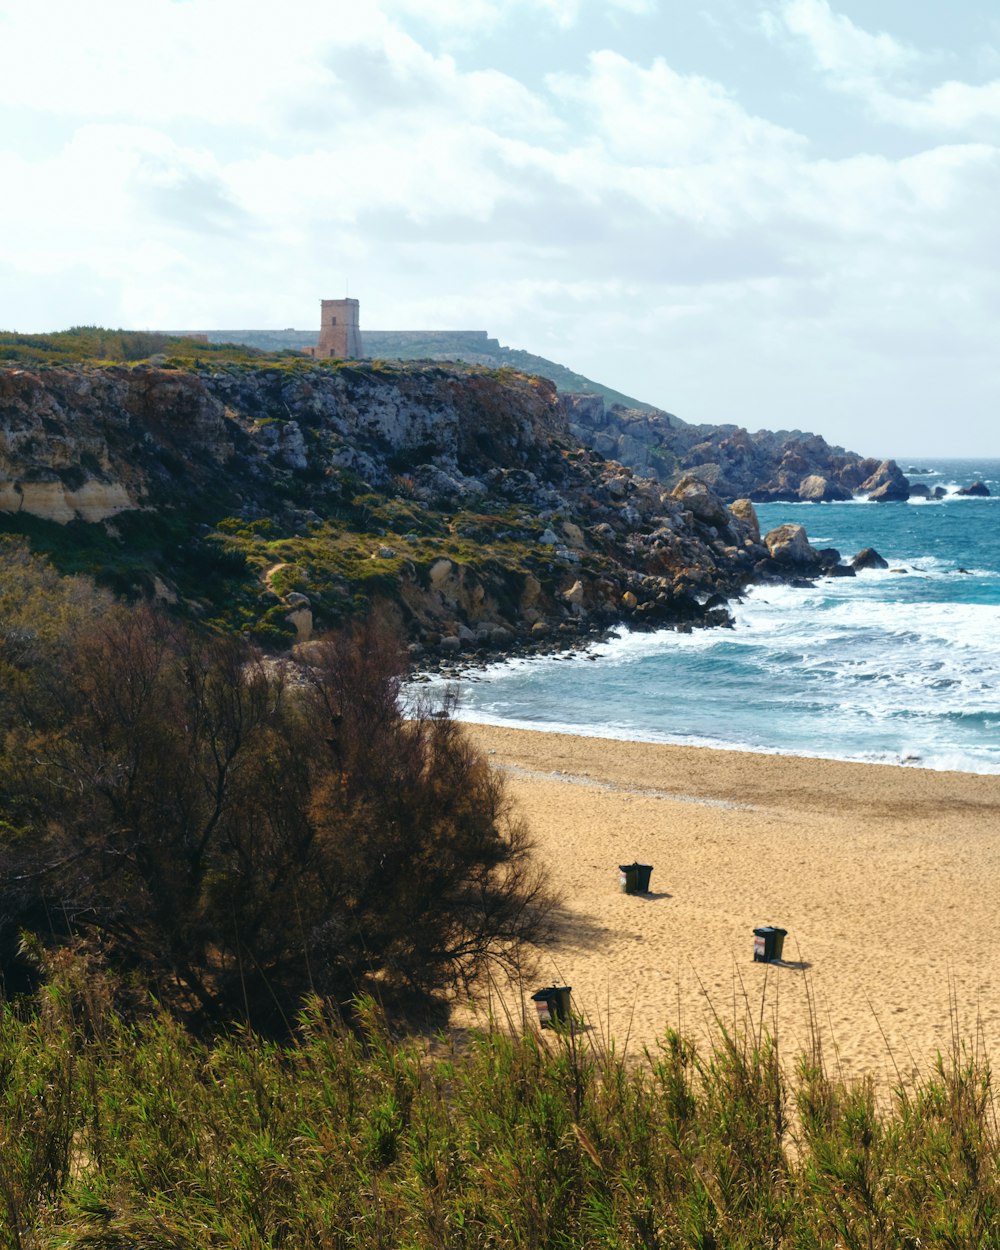 a sandy beach next to the ocean with a tower in the background